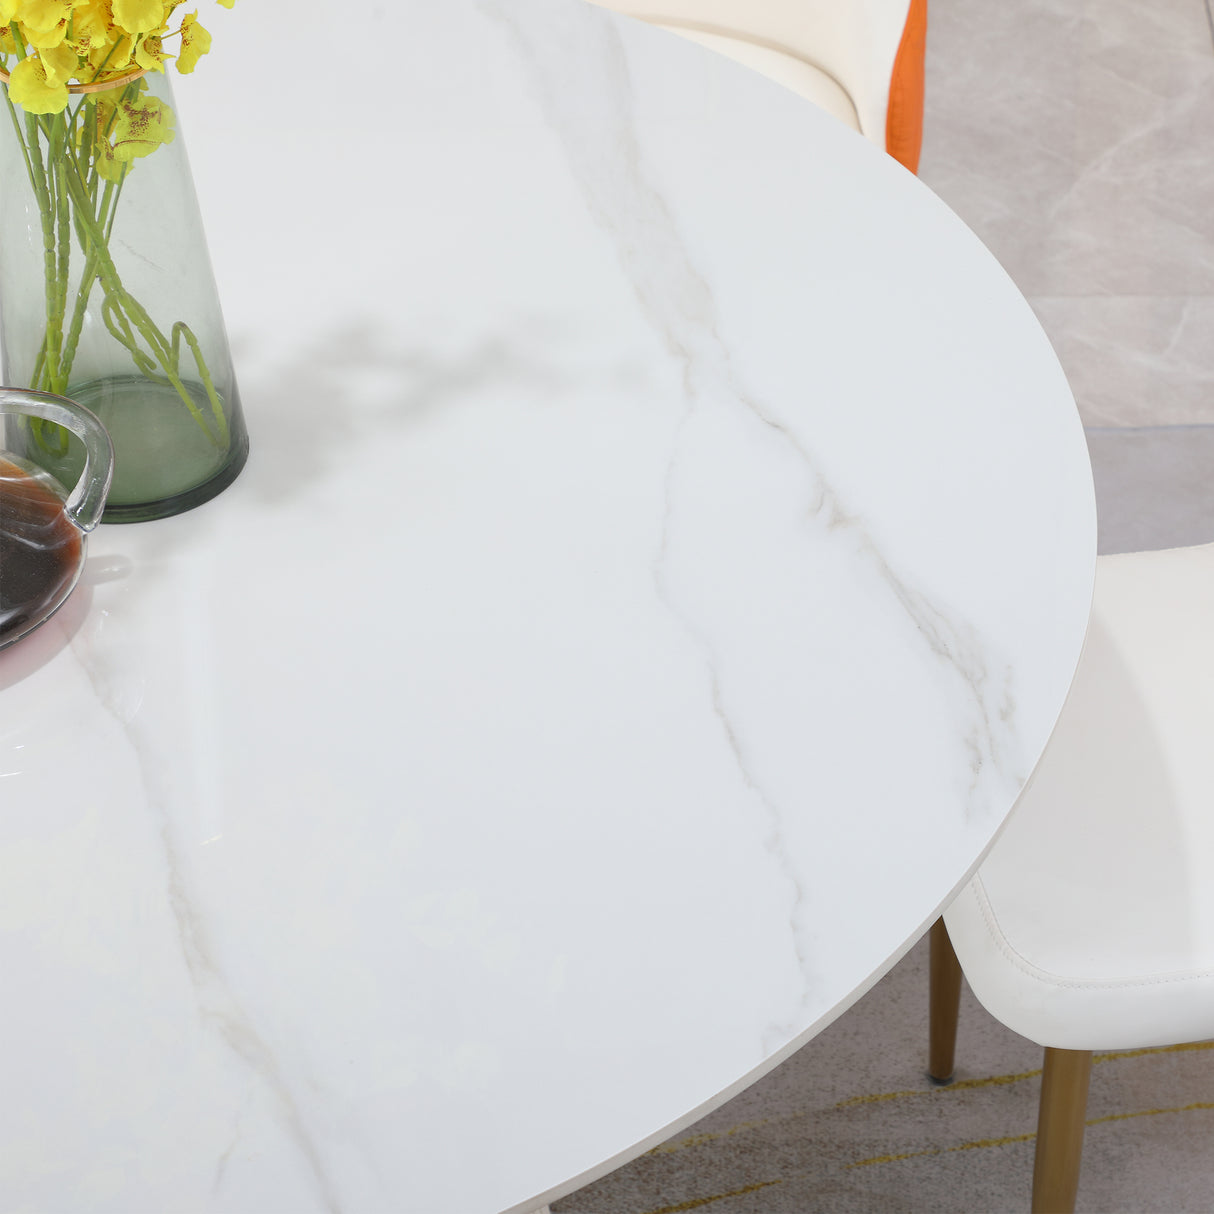 53 inch Round sintered stone carrara white dining table - Home Elegance USA